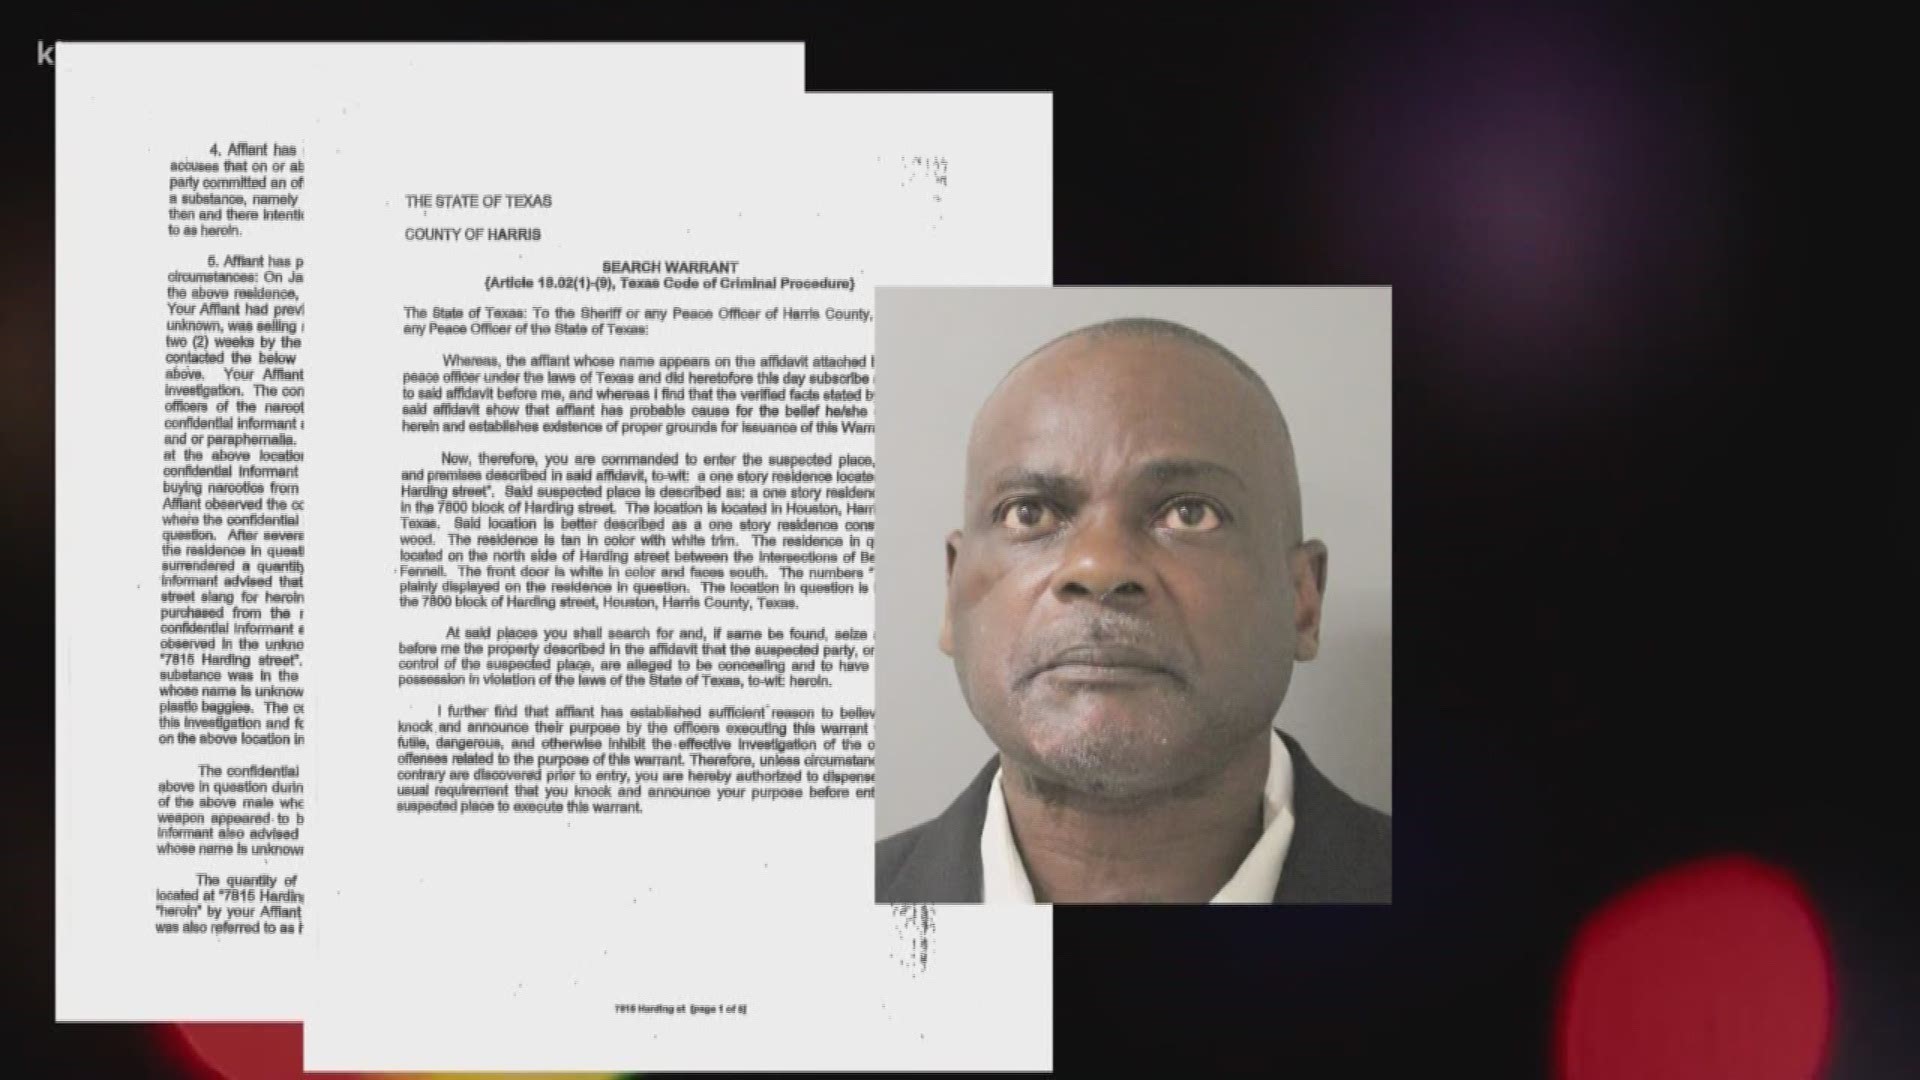 The original affidavit Gerald Goines wrote to get the search warrant authorized was full of lies, prosecutors said Friday.